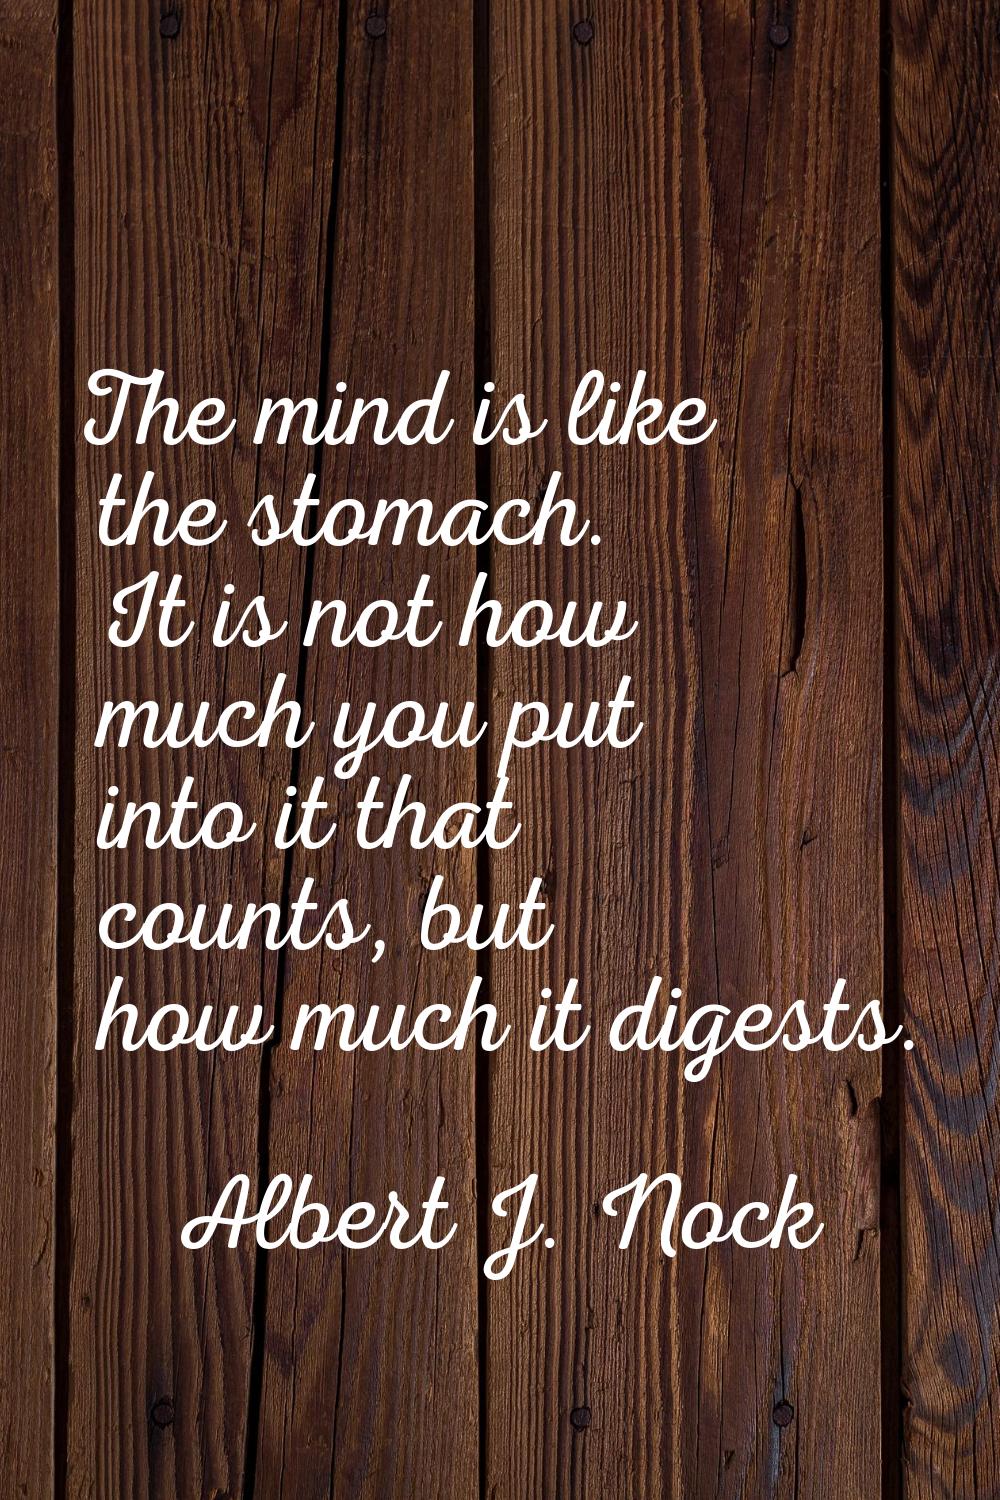 The mind is like the stomach. It is not how much you put into it that counts, but how much it diges